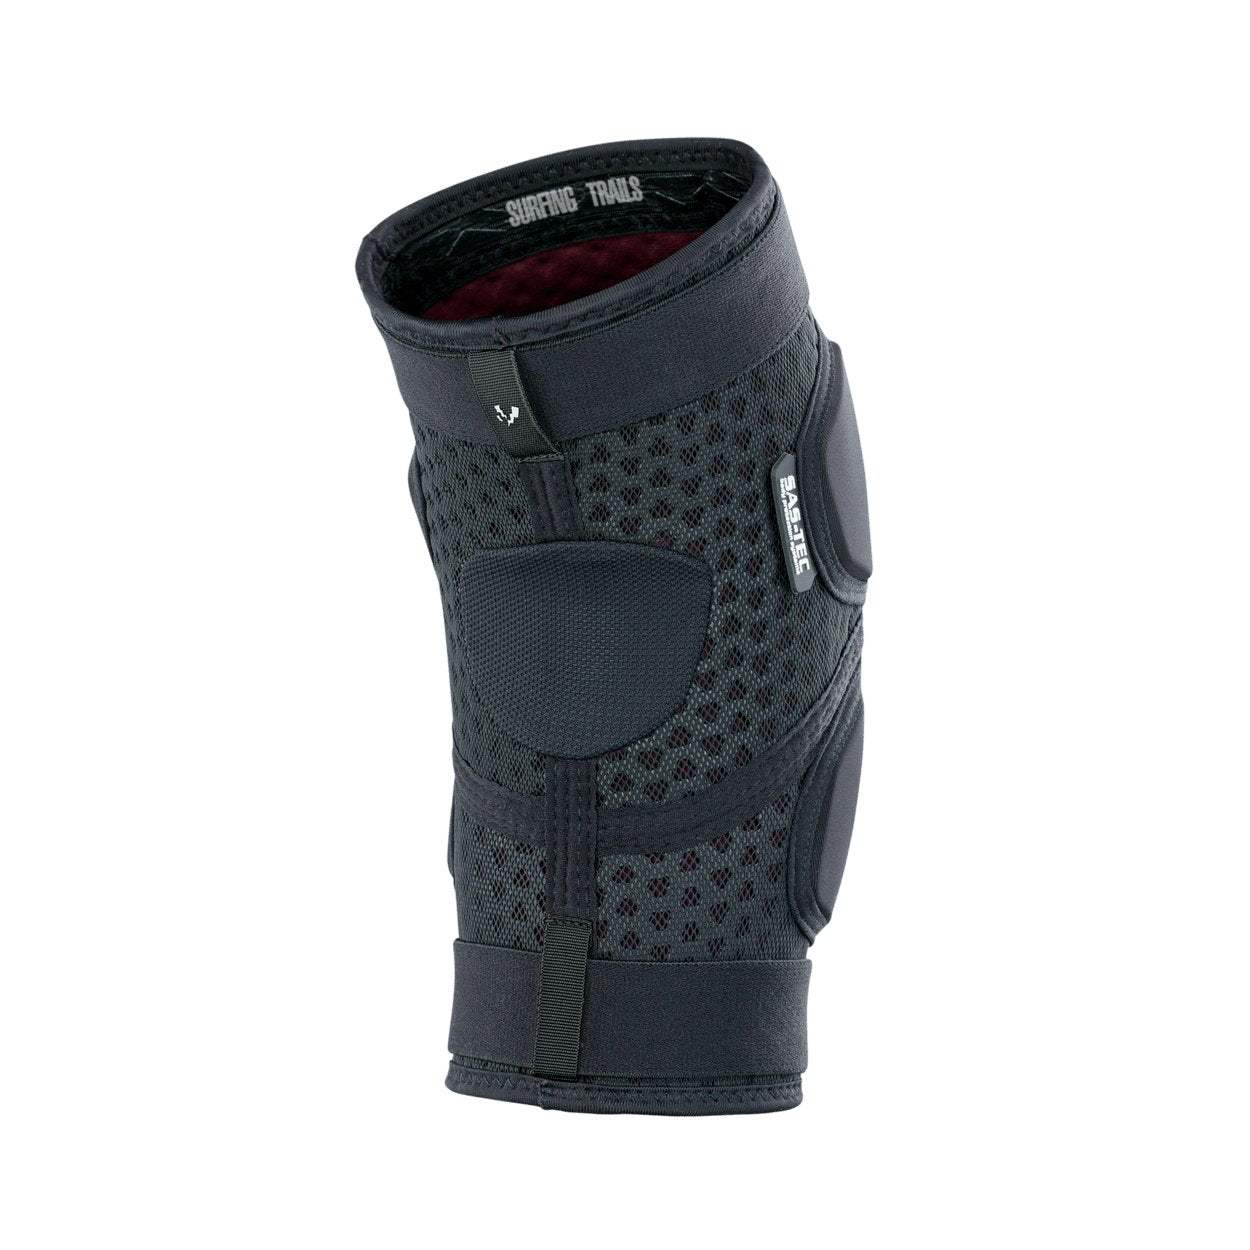 ION Youth MTB Knee Pads K-Pact 2024 - Worthing Watersports - 9008415981632 - Body Armor - ION Bike